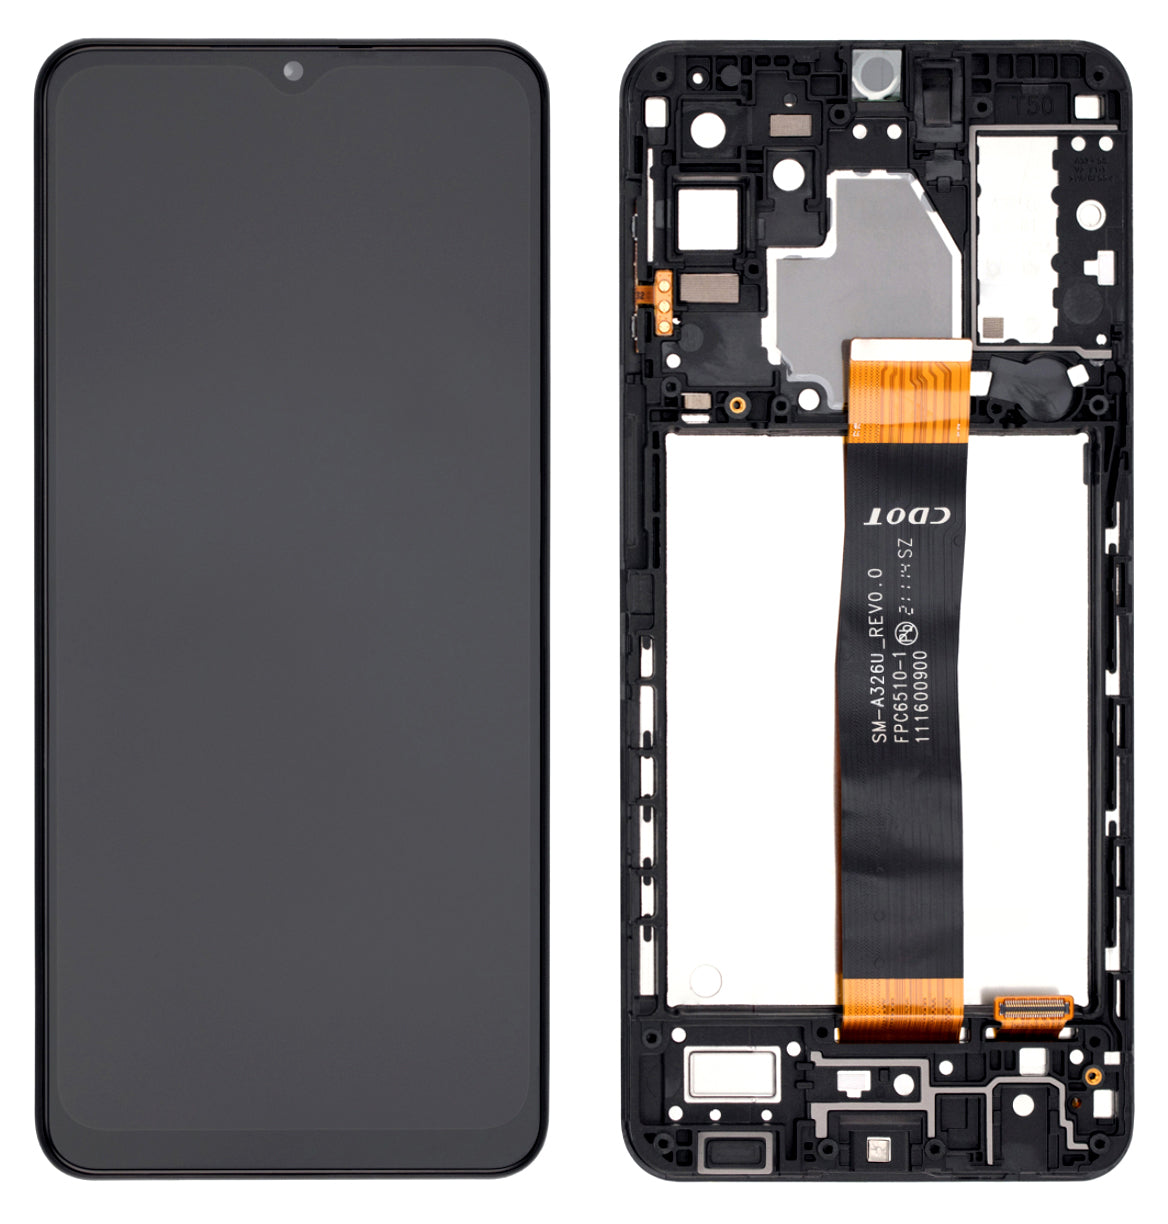  Viimon for Galaxy A32 5G LCD Screen Replacement OEM with Frame  Compatible with Galaxy A32 5G SM-A326U LCD Display Touch Screen Digitizer  Assembly with Repair Tools and Installation Manual : Cell